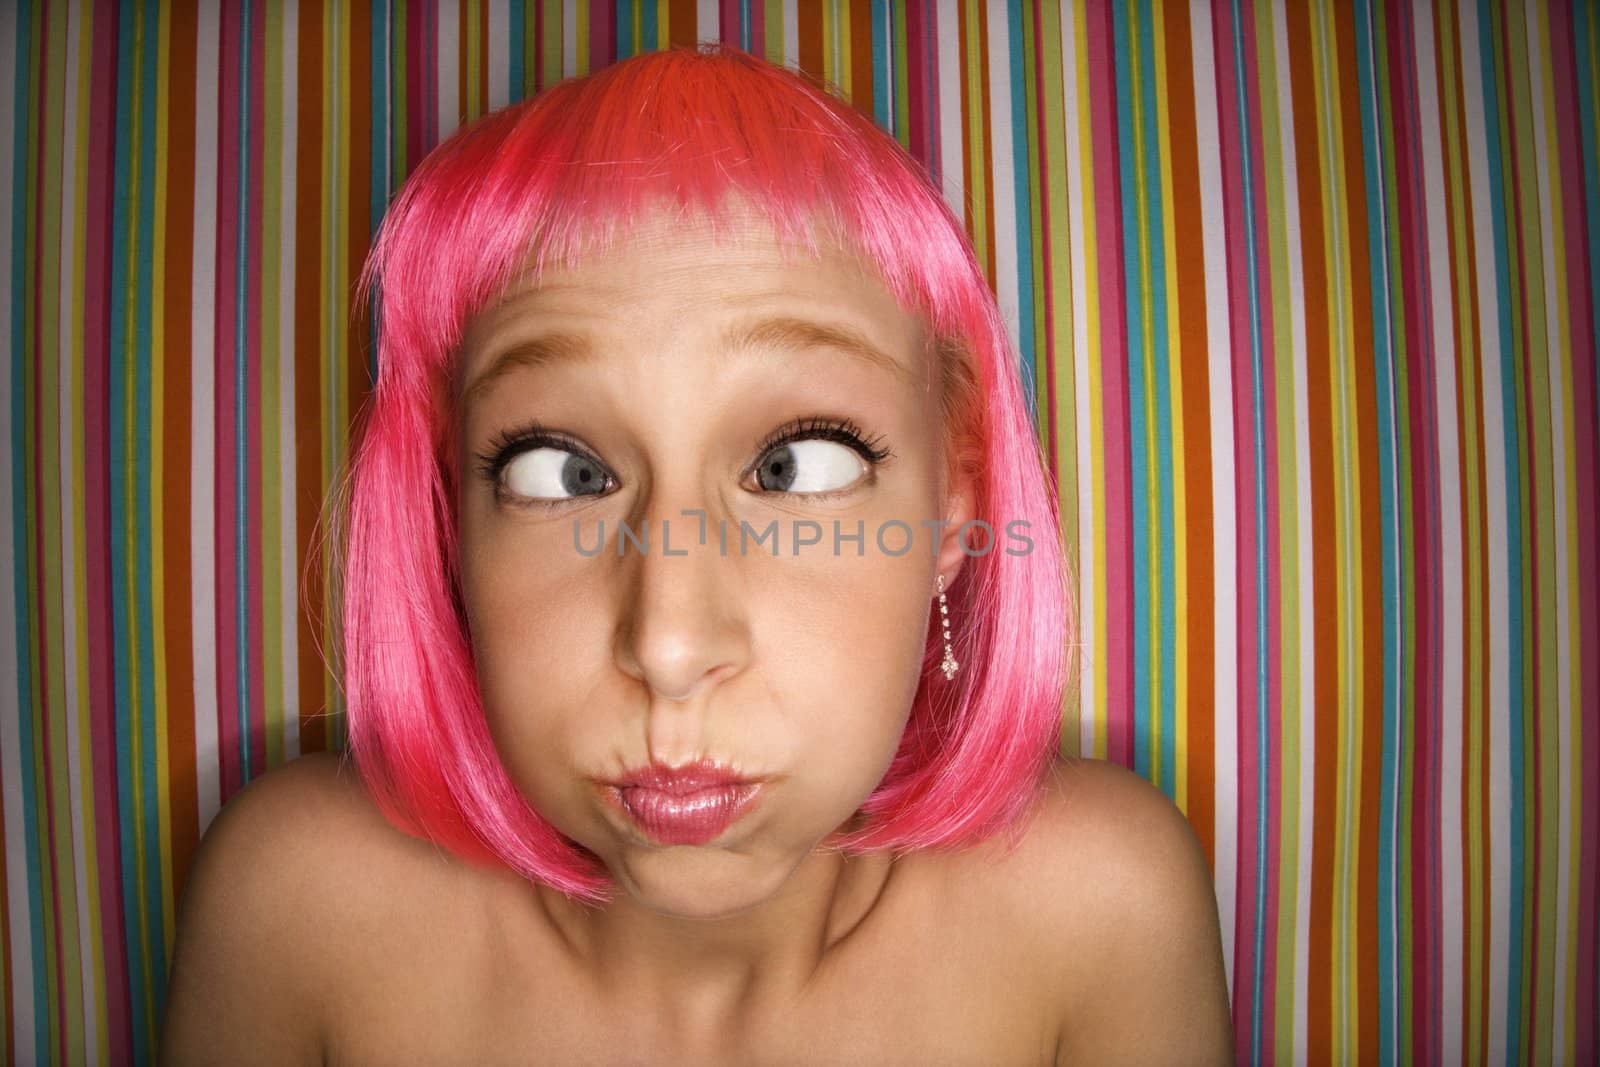 Portrait of attractive Caucasian young adult woman wearing pink wig against striped background making cross eyed expression.